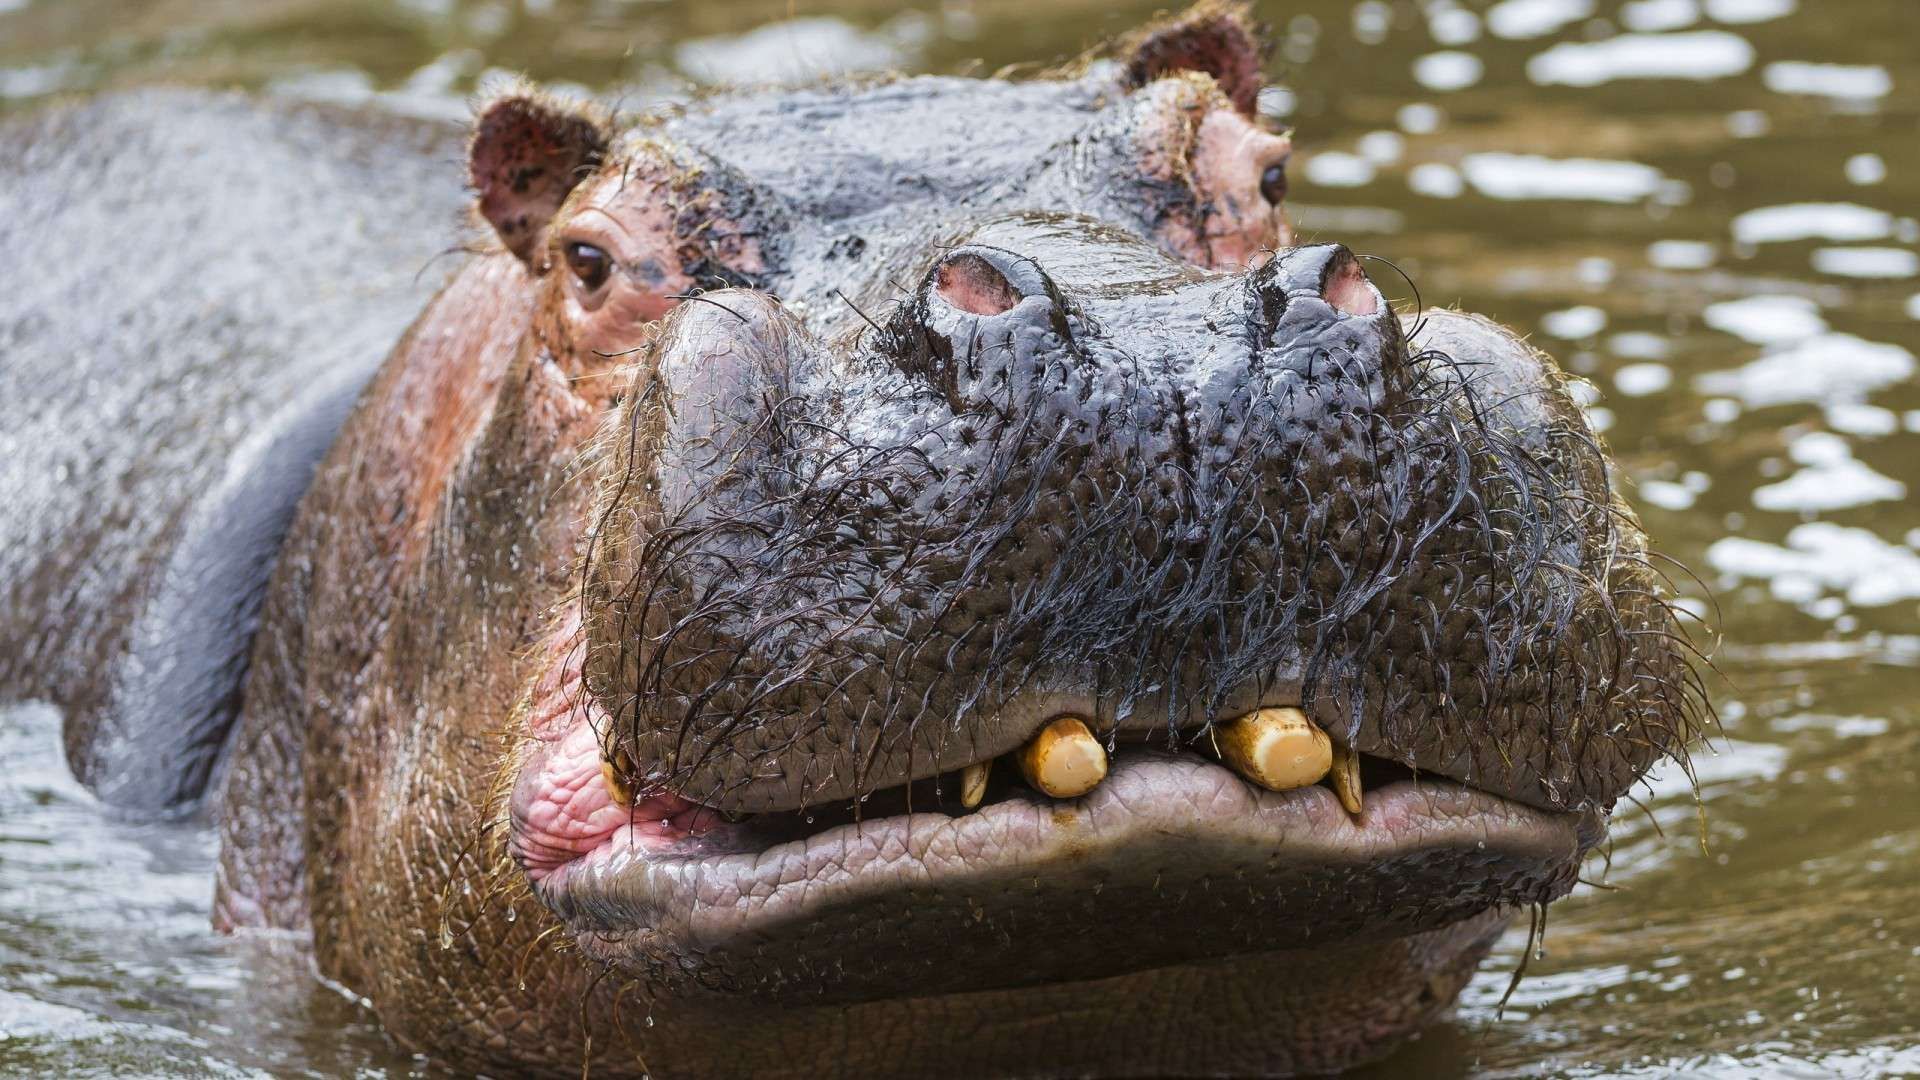 The Hippo And The Hippo